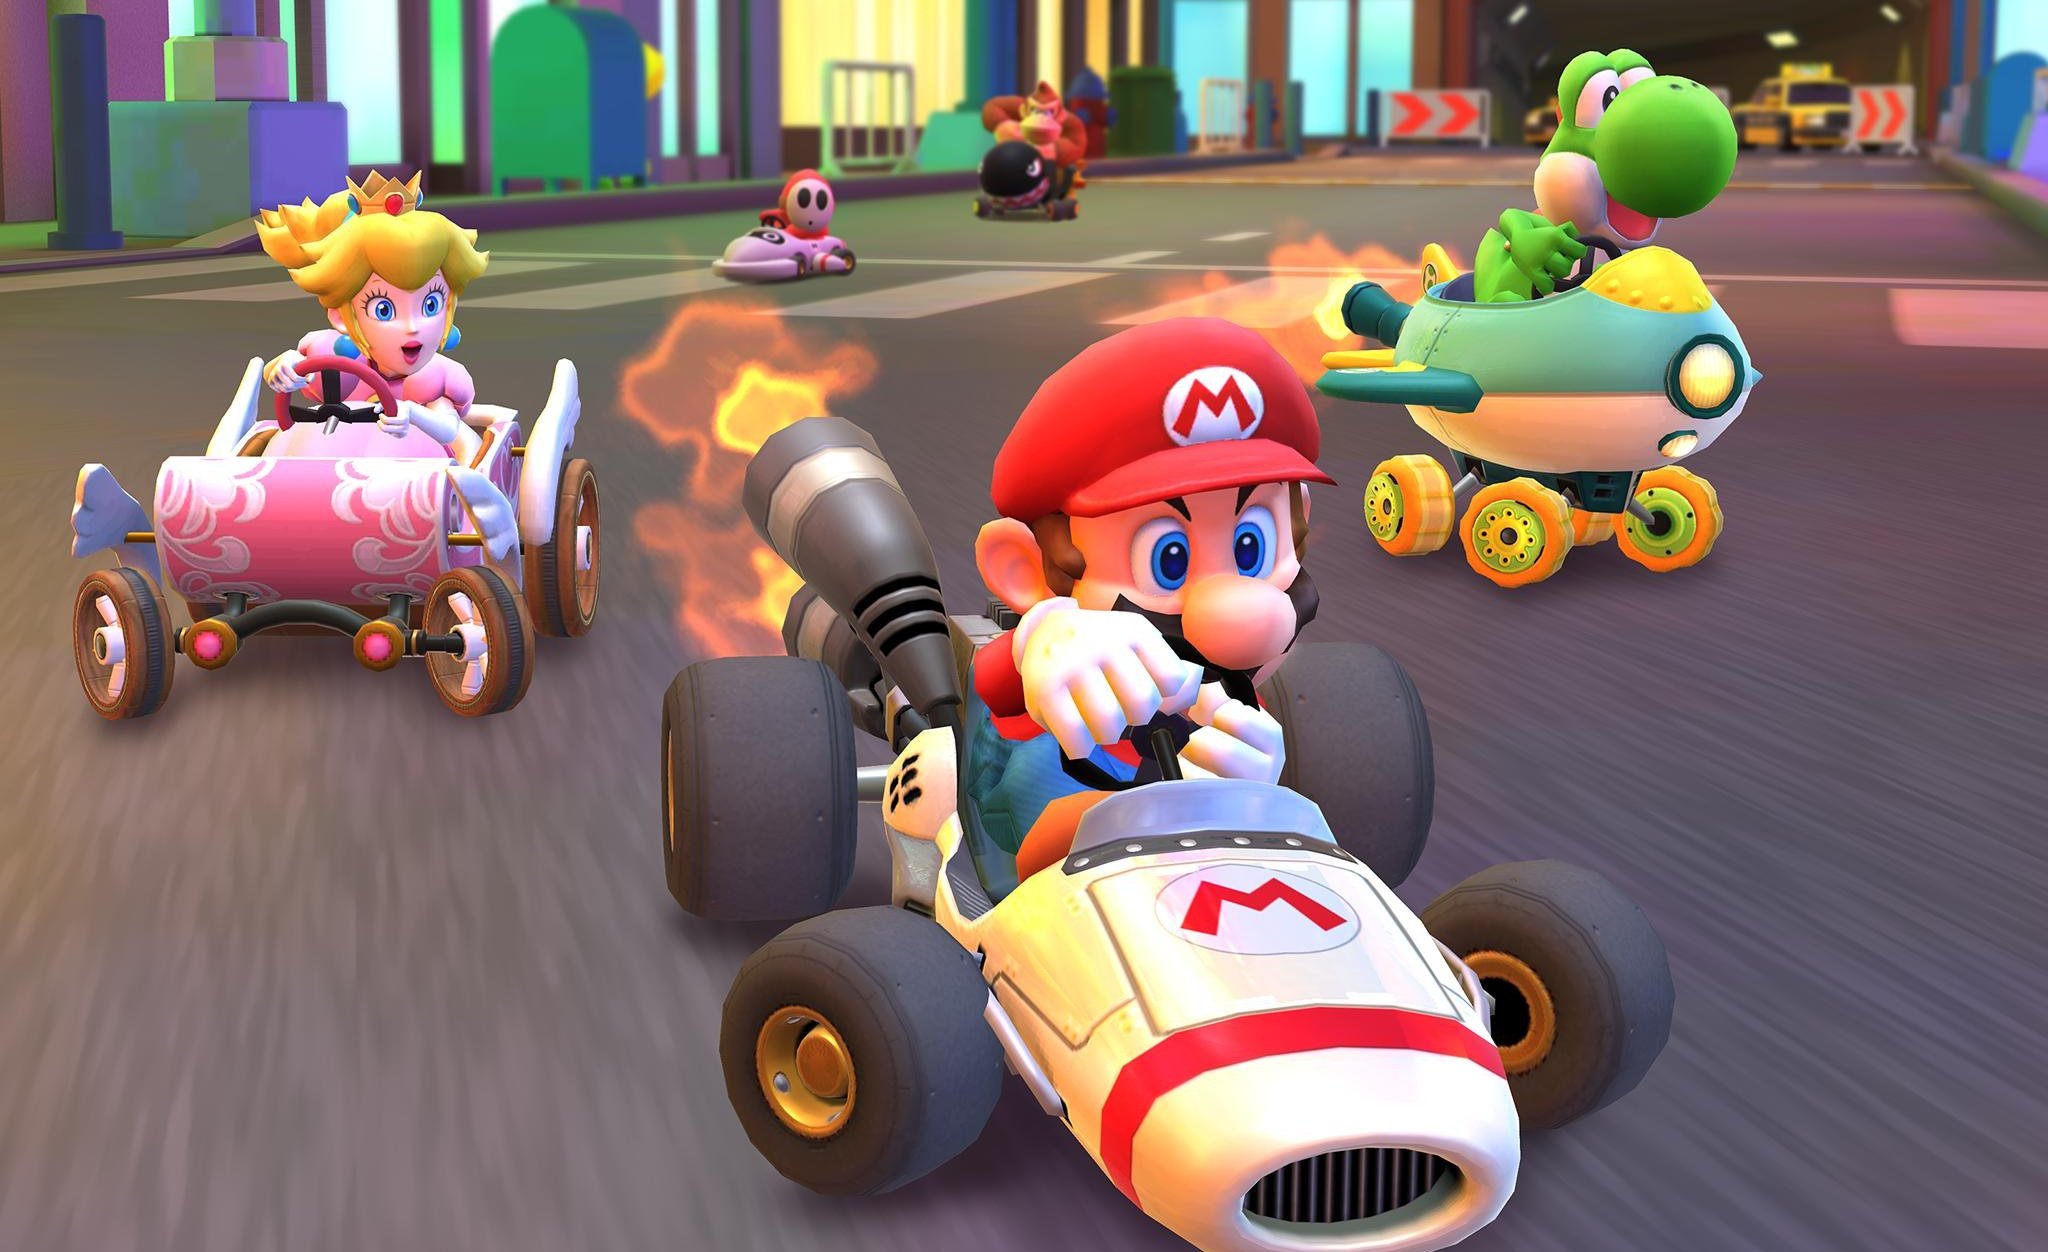 Mario Kart Tour Is Now Live On Smartphones, But Good Luck Getting To